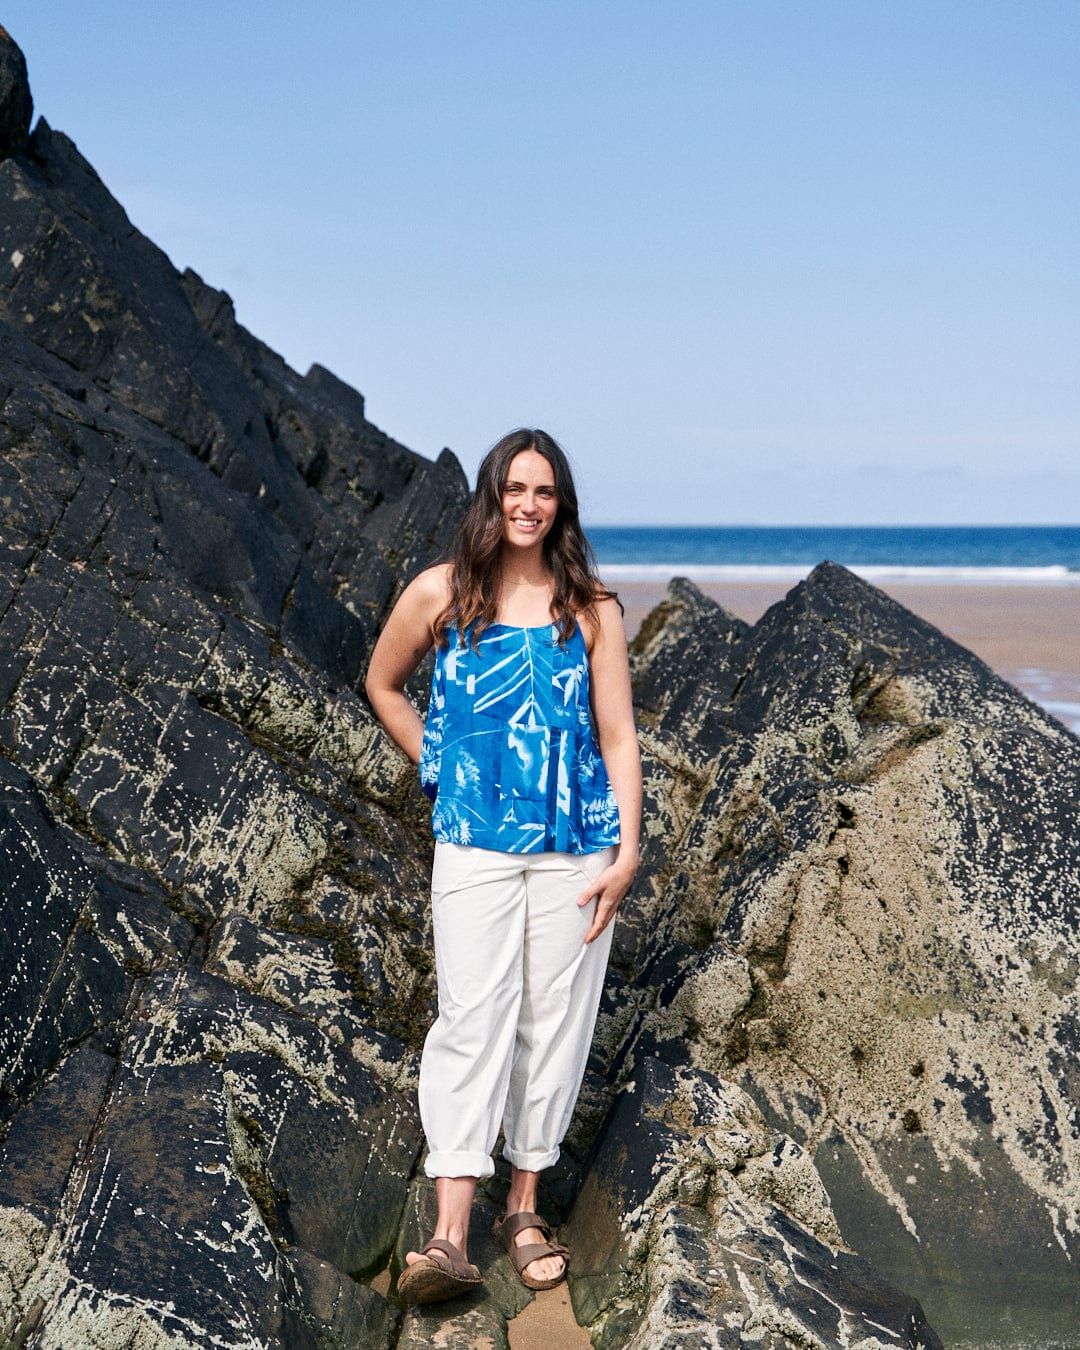 A woman stands on a rocky beach, wearing the Cyanotype - Womens Cami - Blue from Saltrock, white pants, and sandals. The background features a clear sky and a sandy shoreline. The cami's abstract floral print adds a touch of elegance to the serene scene.